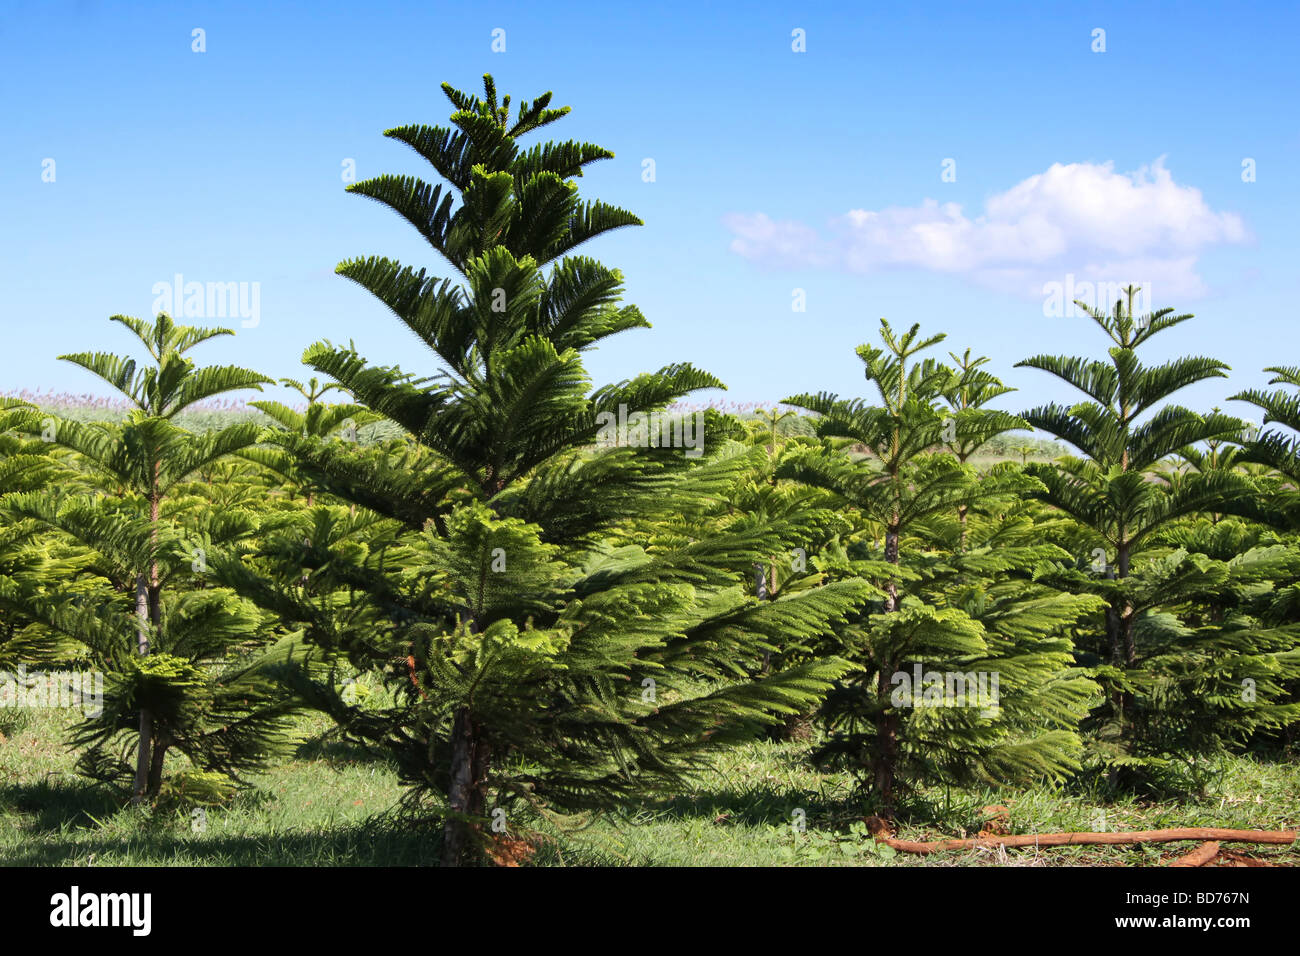 plantation of pine trees on the tropical island of Mauritius with a beautiful blue cloudy background Stock Photo